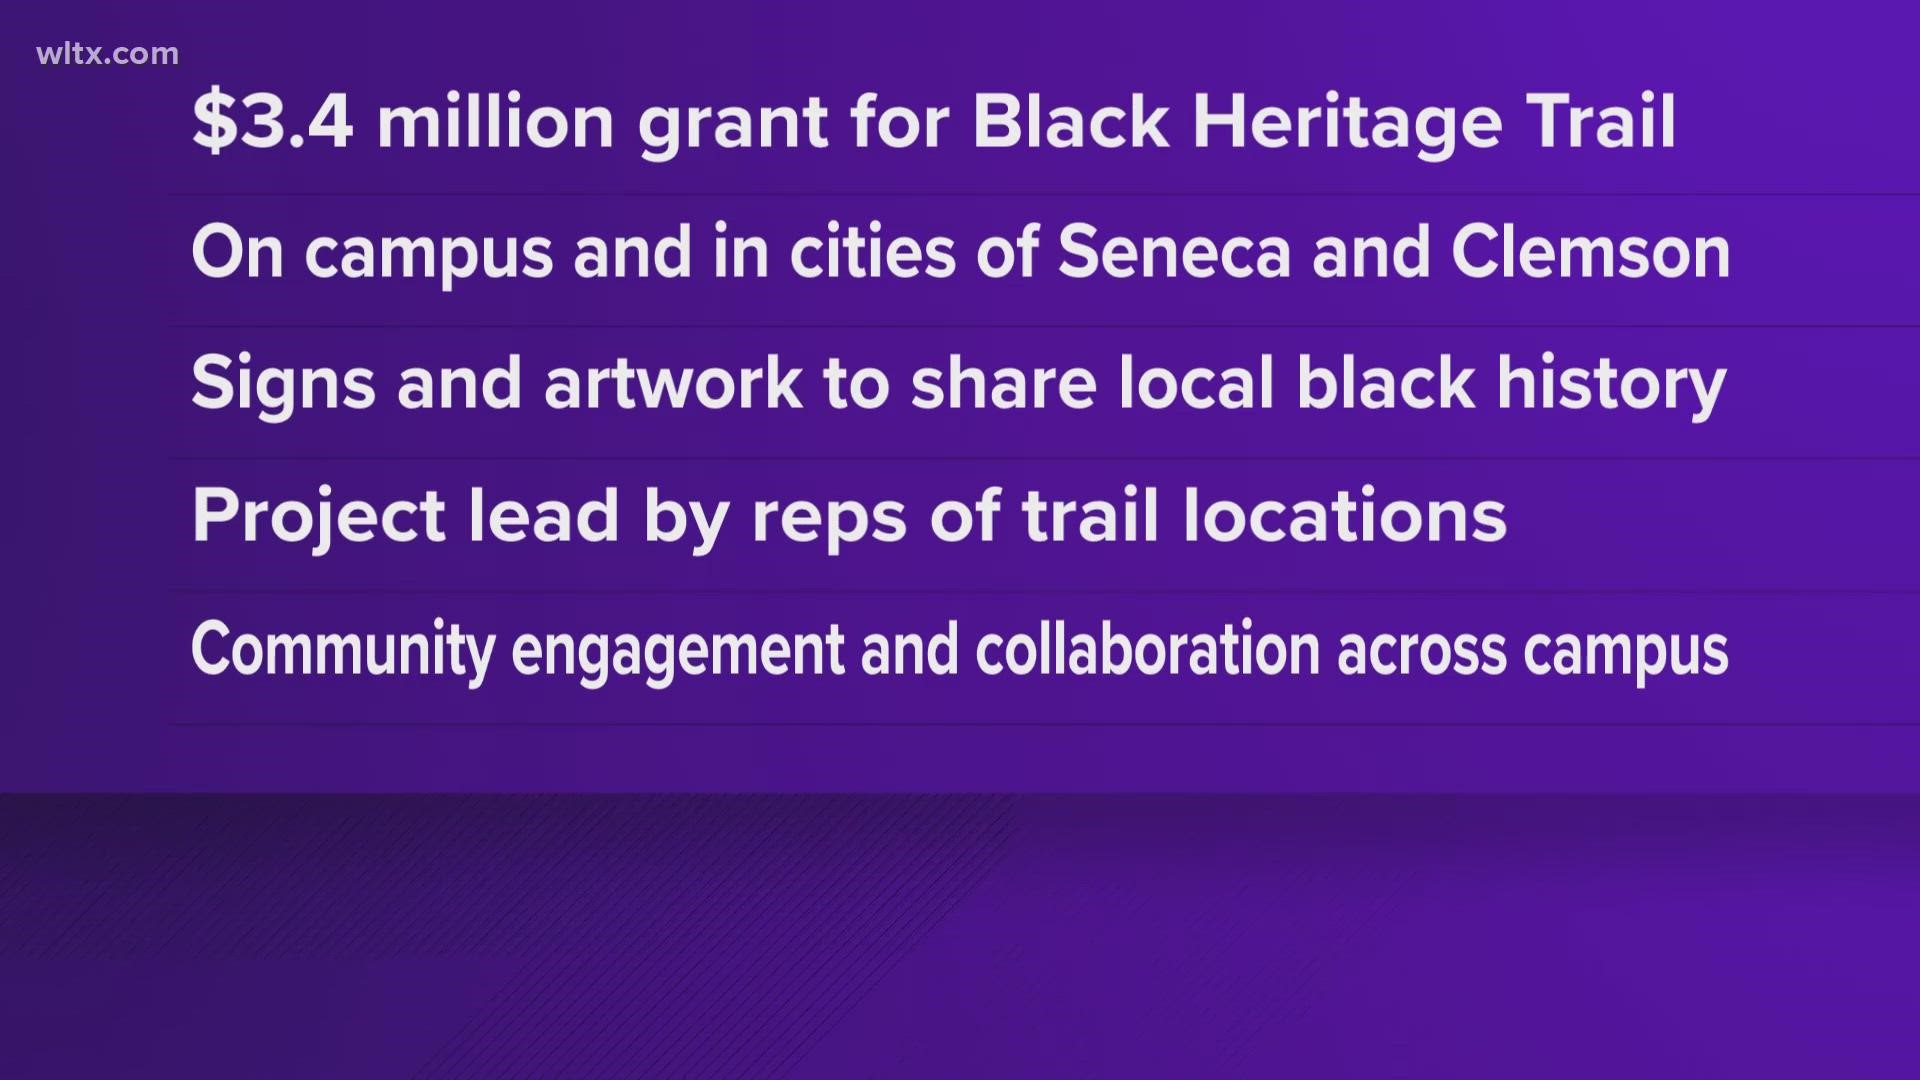 The university received a $3.4M grant to create a Black heritage trail.